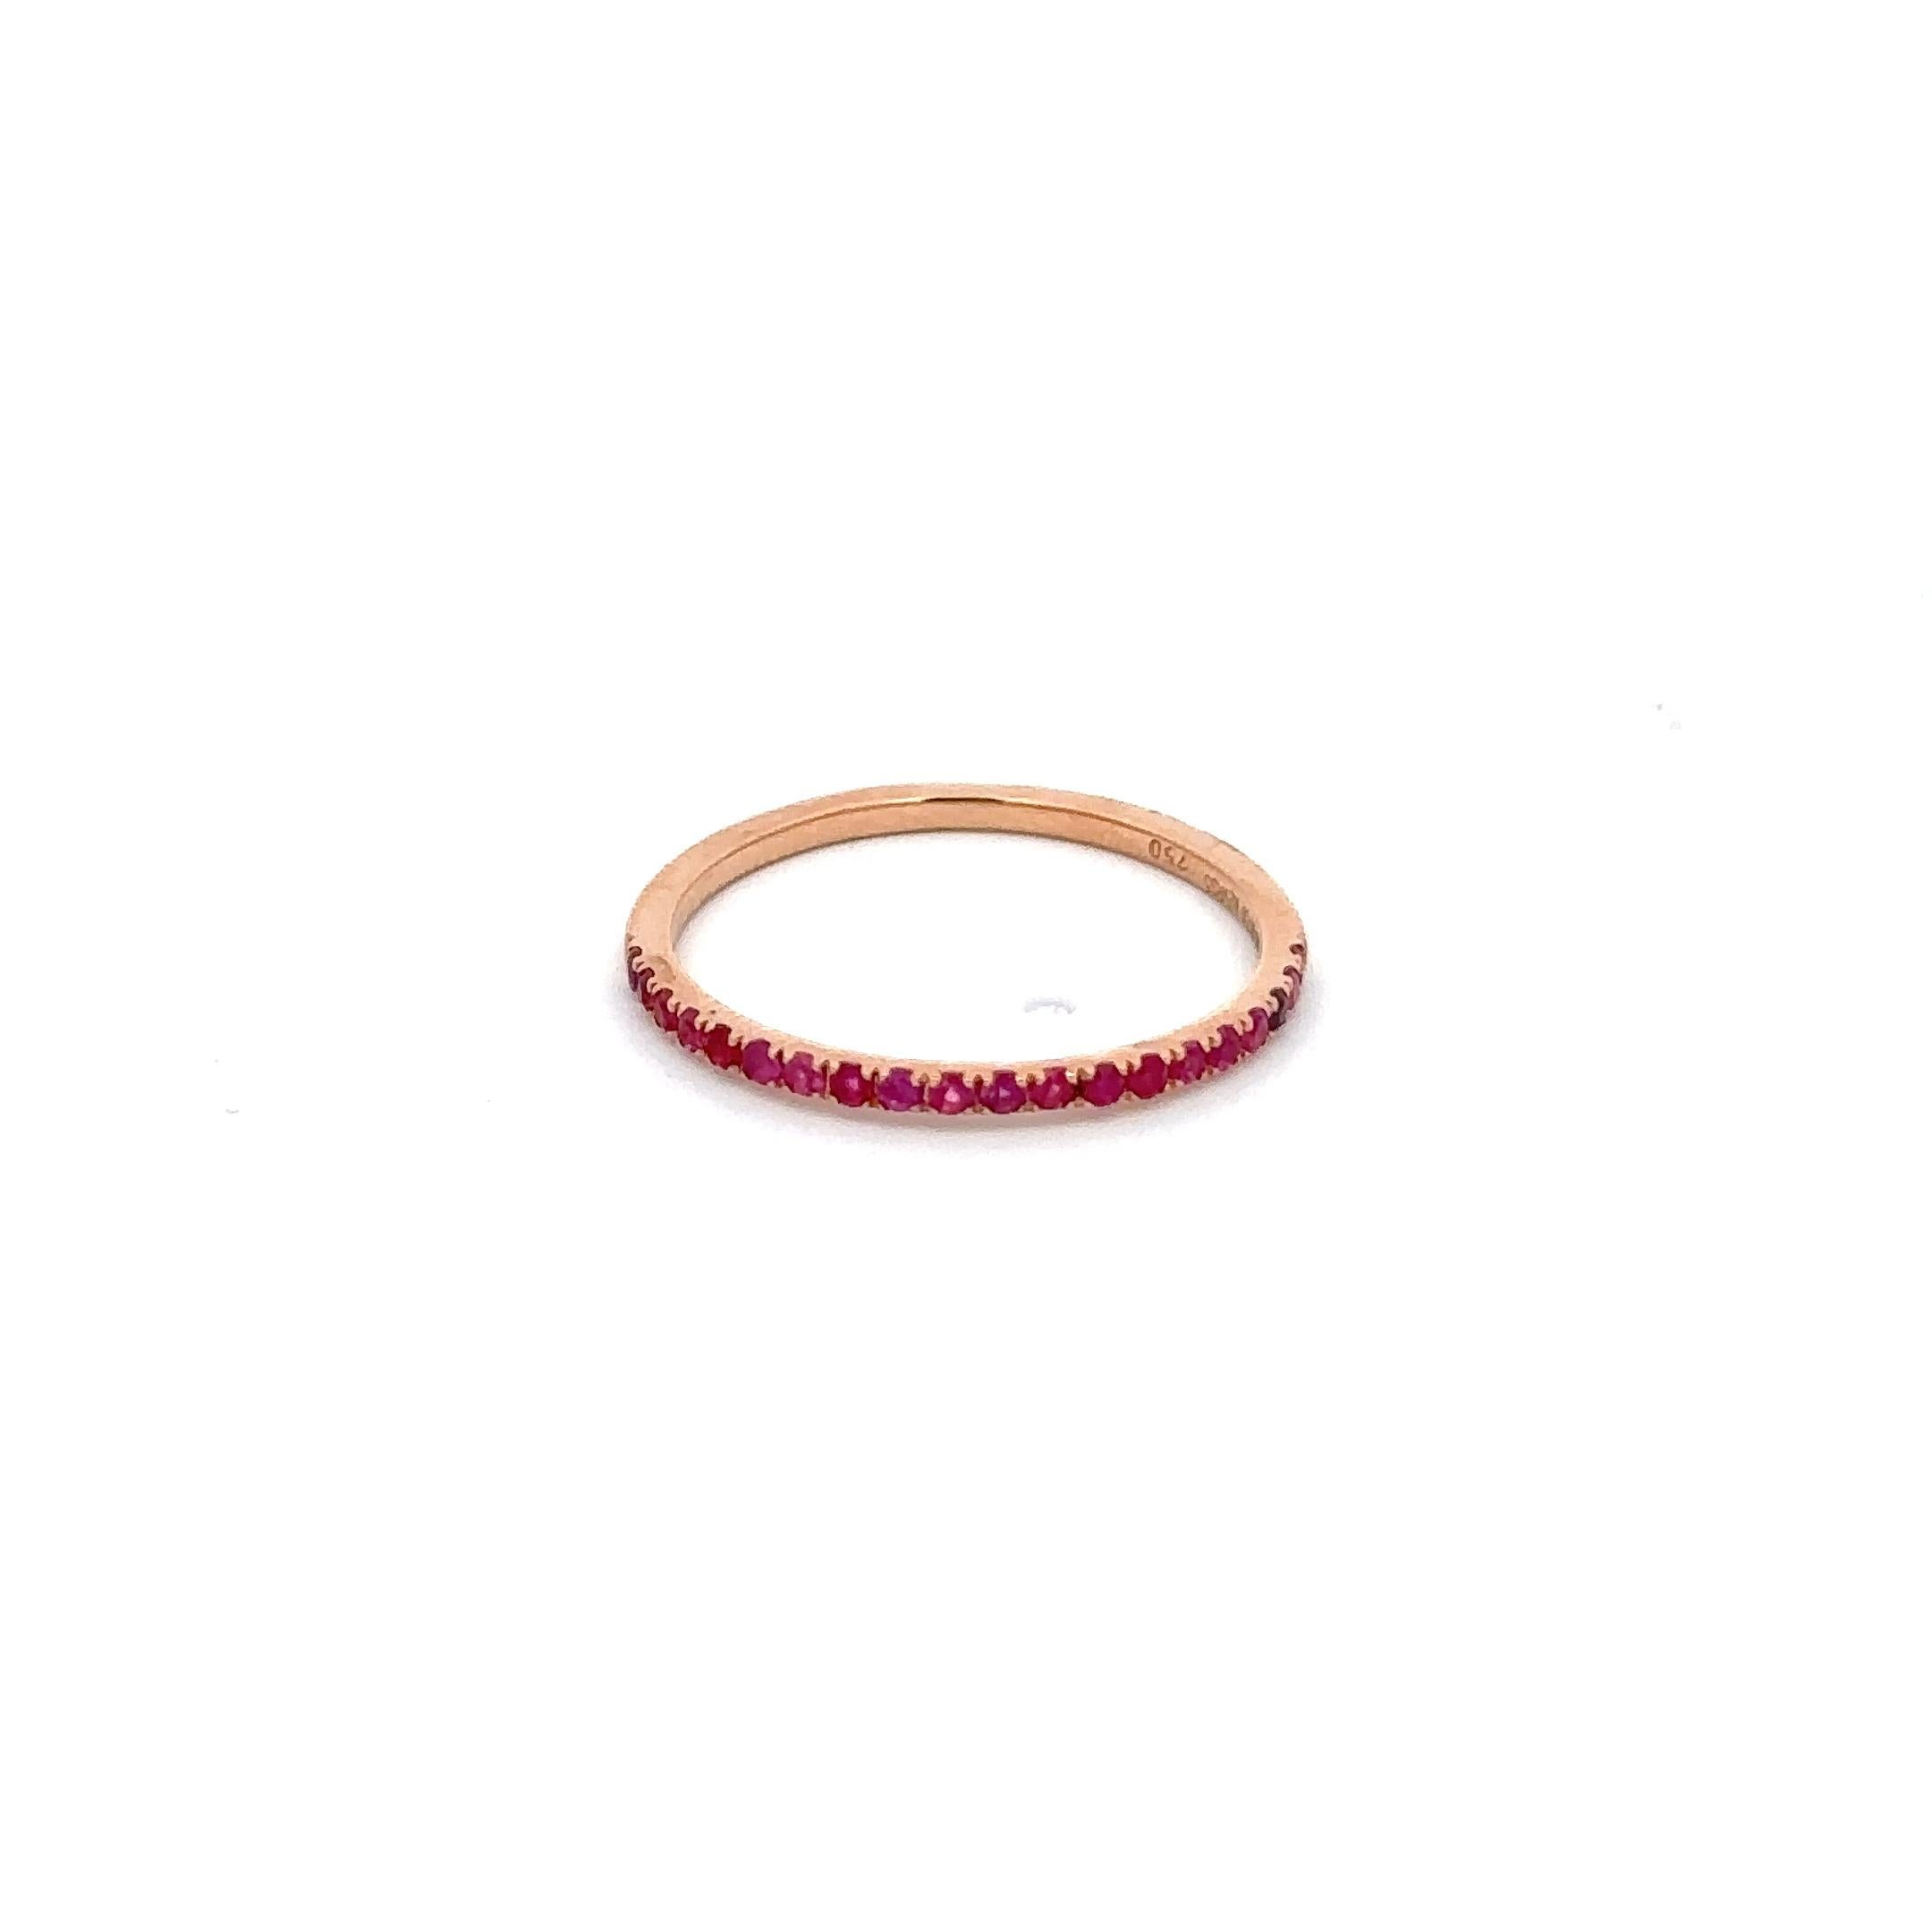 For Sale:  Handcrafted Pave Set Ruby Stacking Band Ring in 18k Solid Rose Gold 16